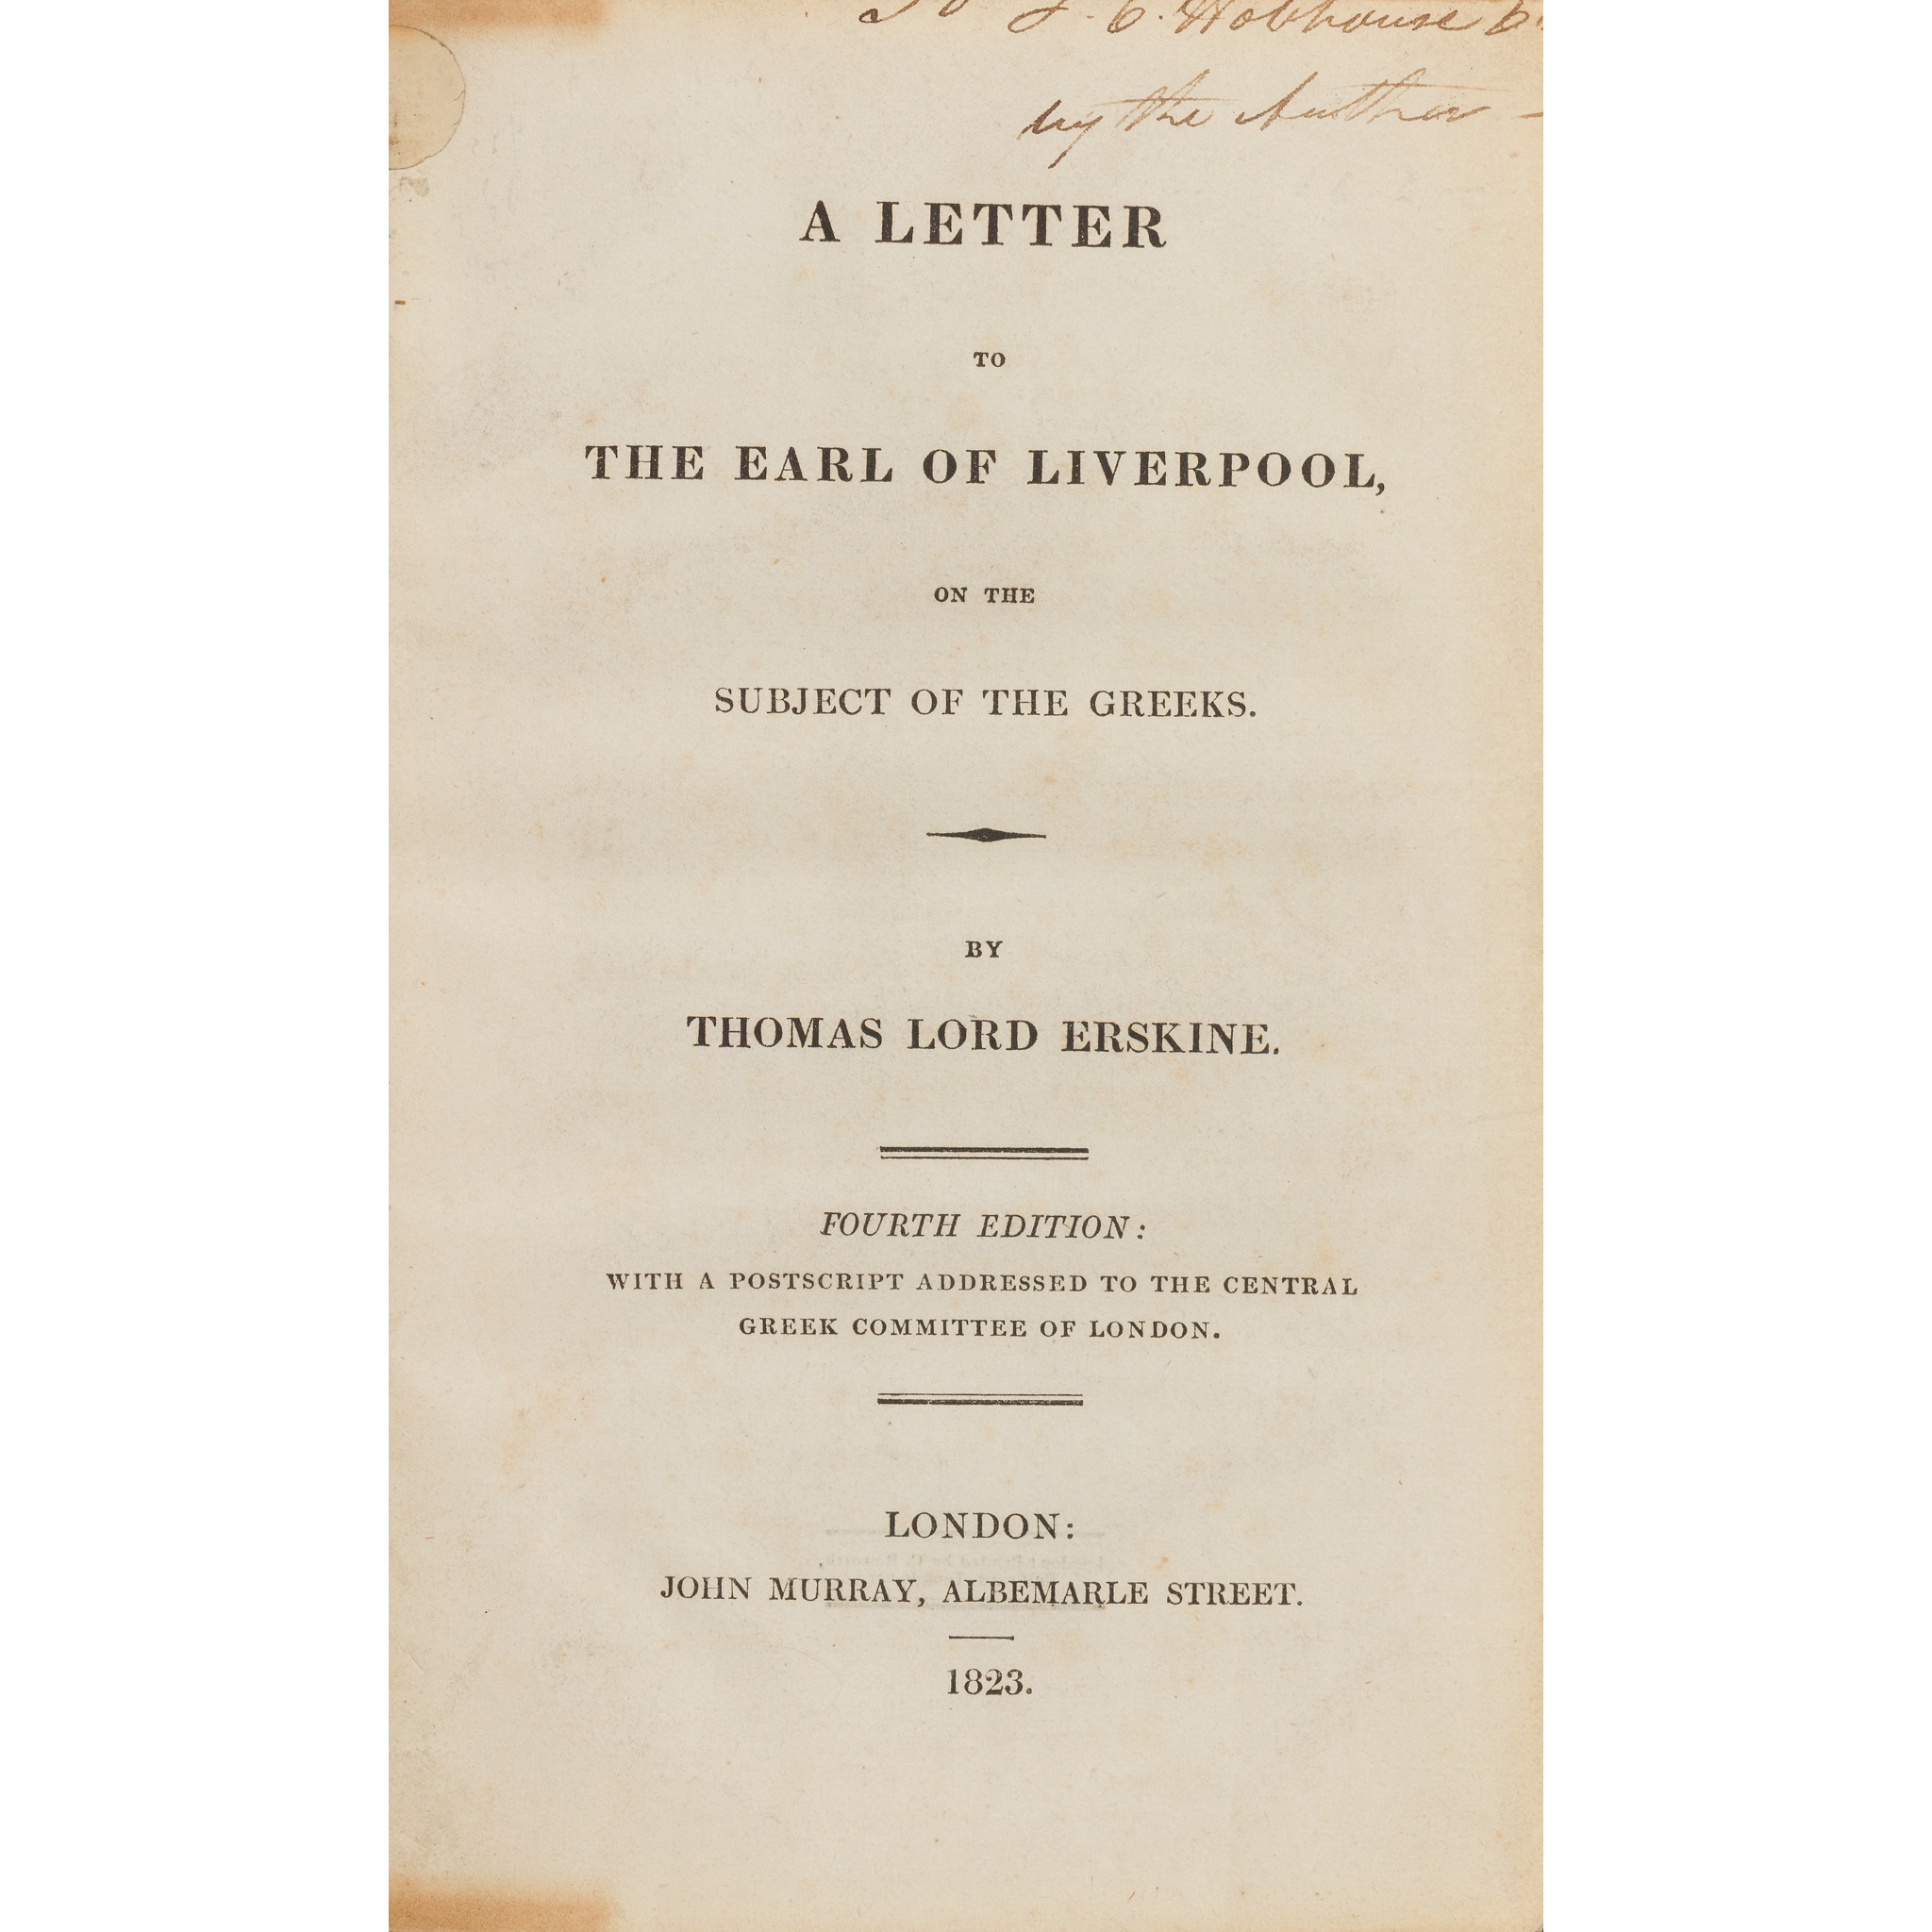 Erskine, Thomas, Lord A Letter to the Earl of Liverpool on the Subject of the Greeks